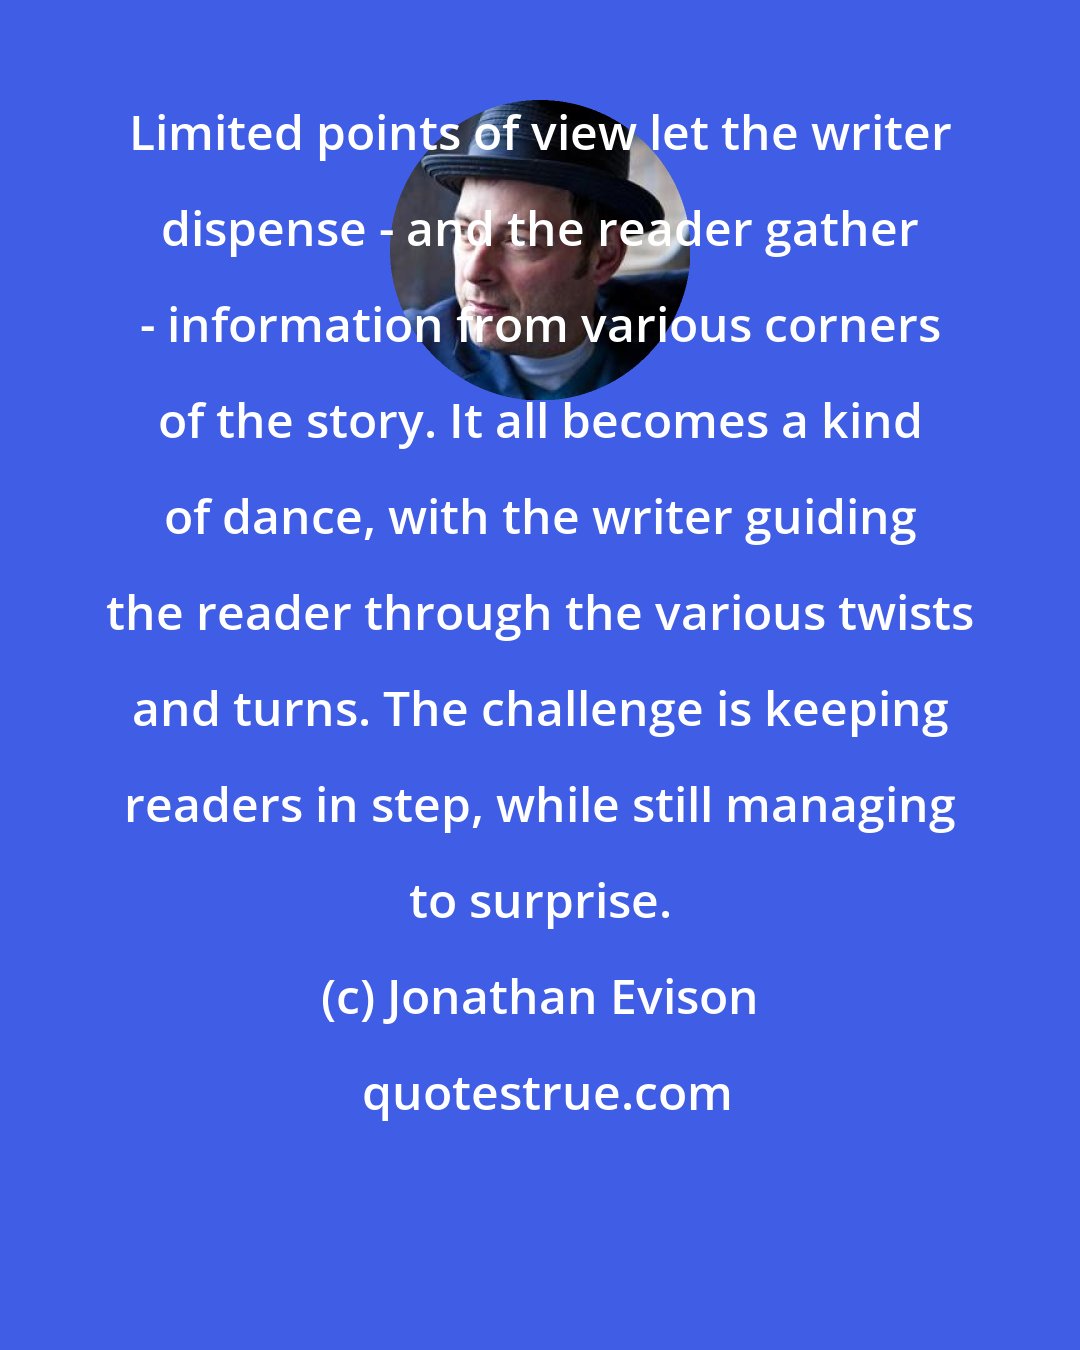 Jonathan Evison: Limited points of view let the writer dispense - and the reader gather - information from various corners of the story. It all becomes a kind of dance, with the writer guiding the reader through the various twists and turns. The challenge is keeping readers in step, while still managing to surprise.